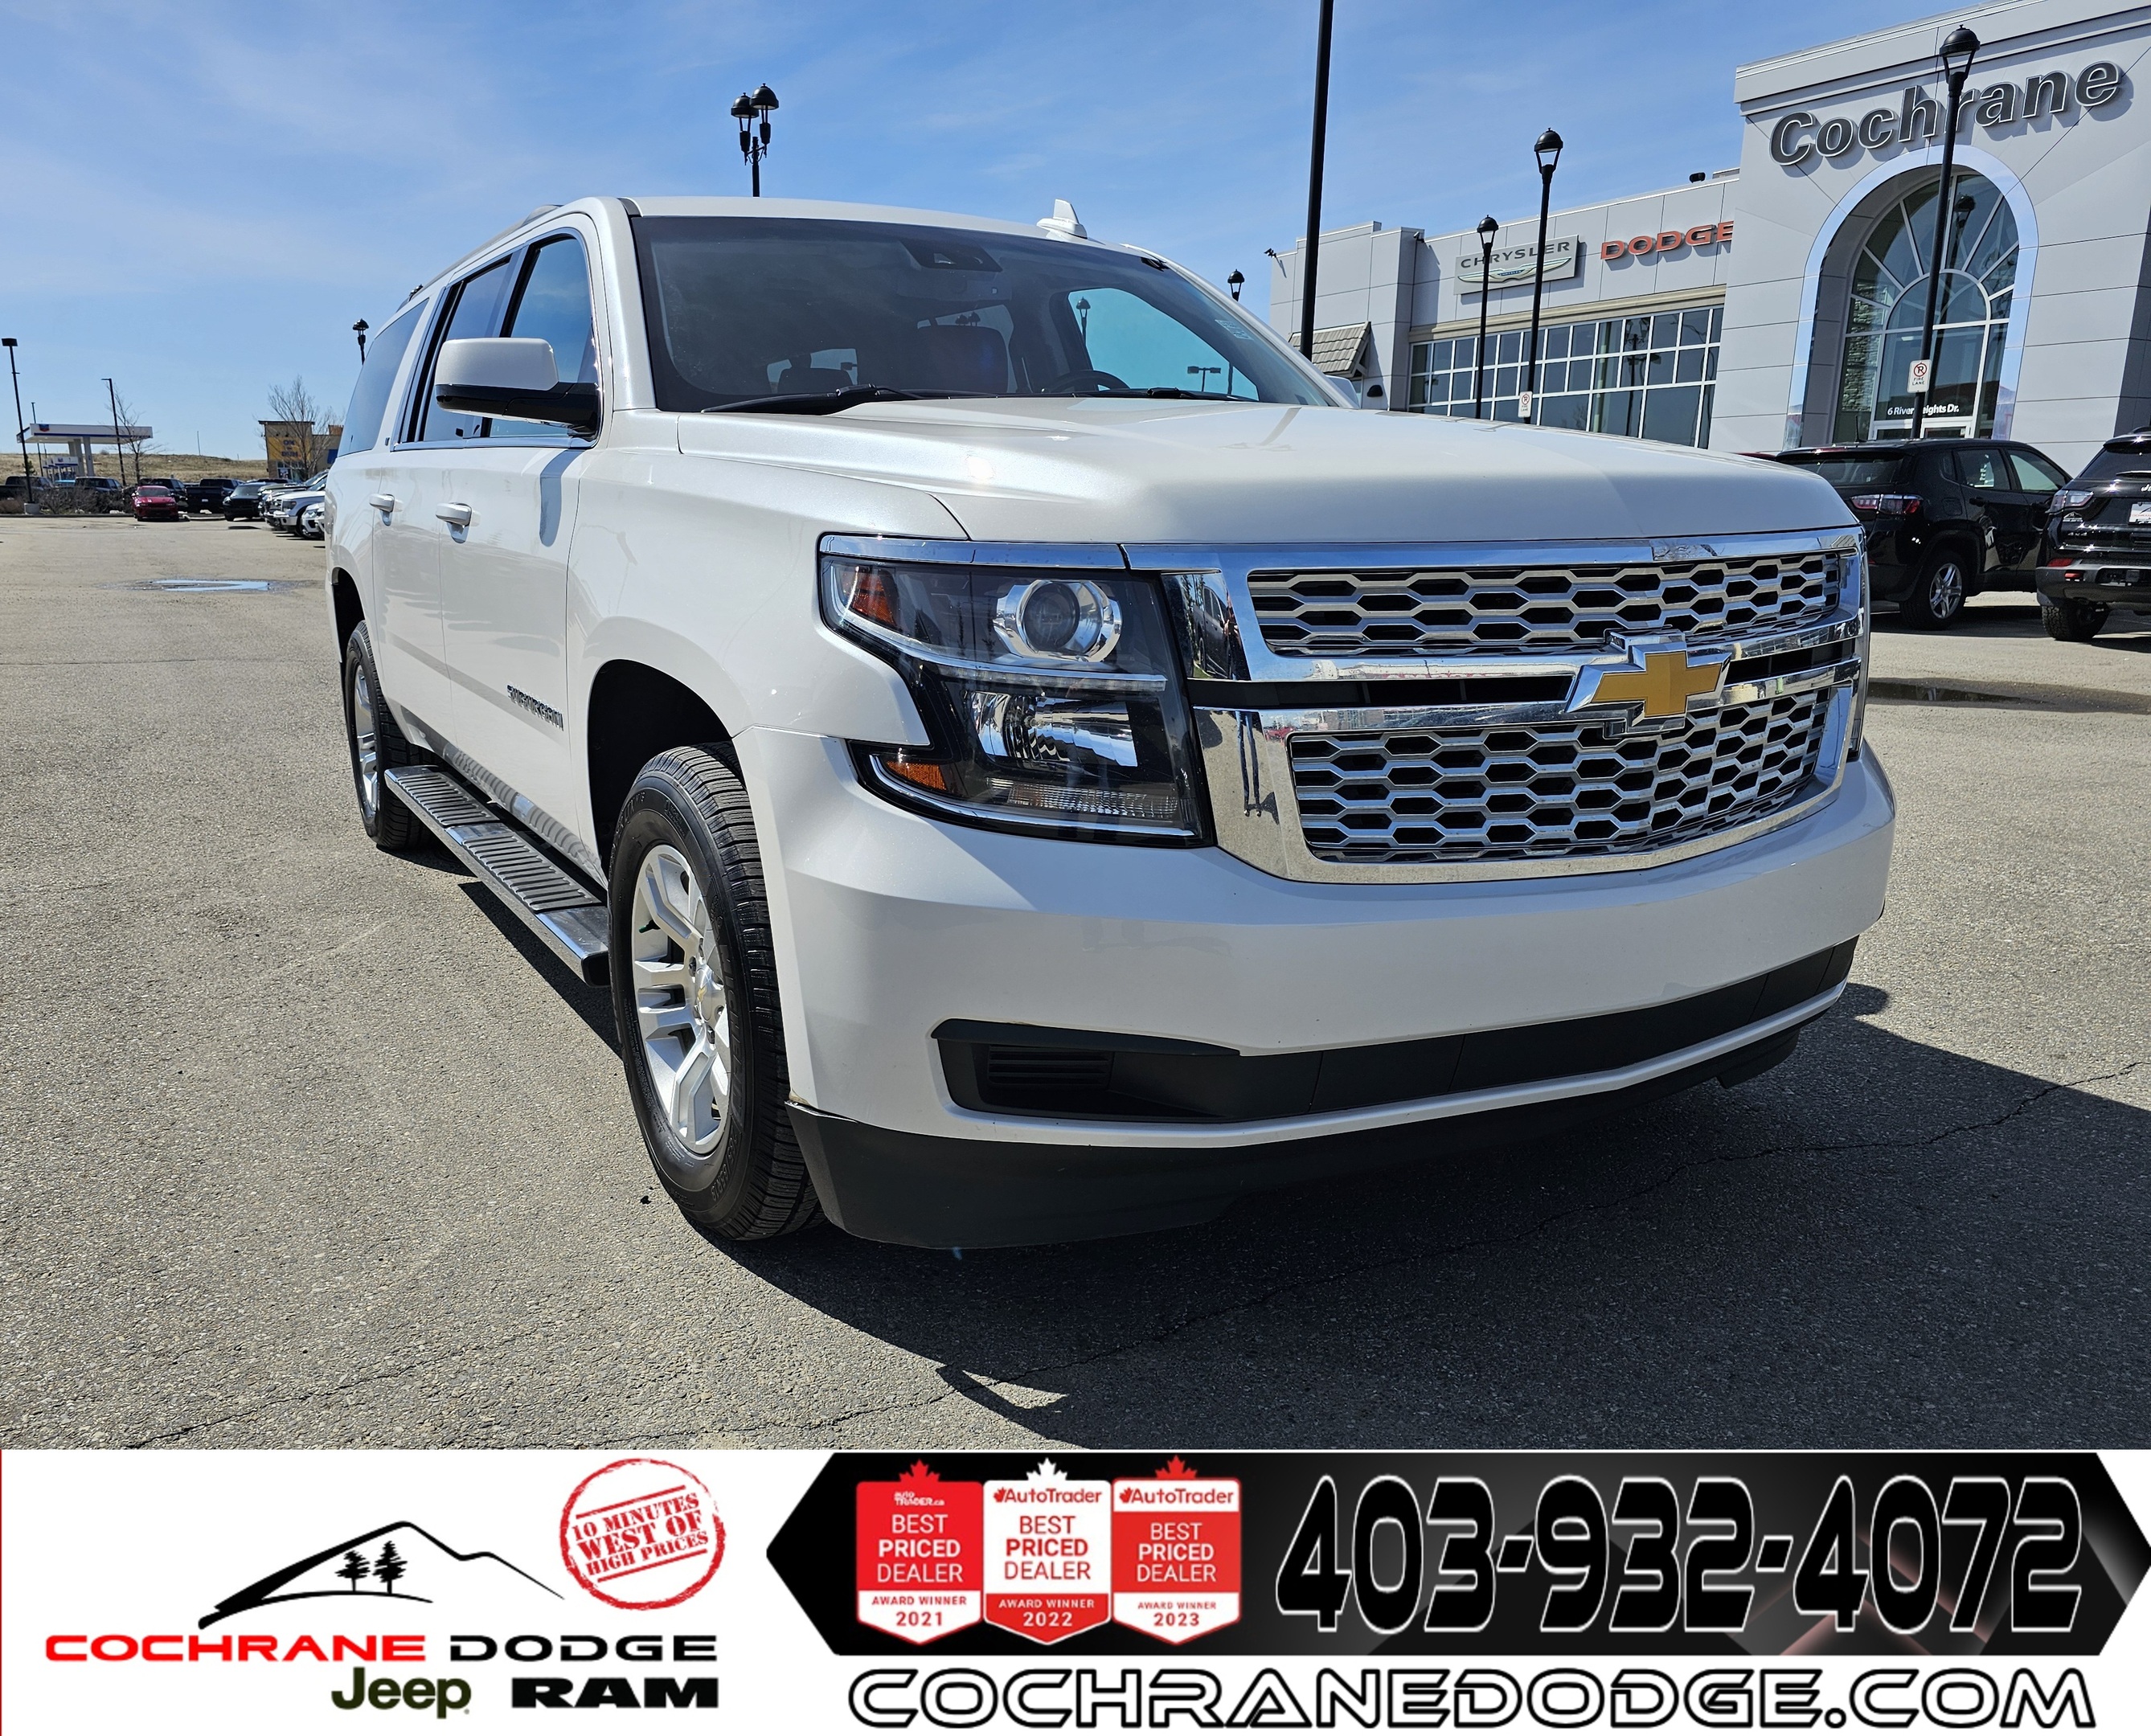 2019 Chevrolet Suburban 1500 LT 4X4 8 Seater with DVD- Great Shape!